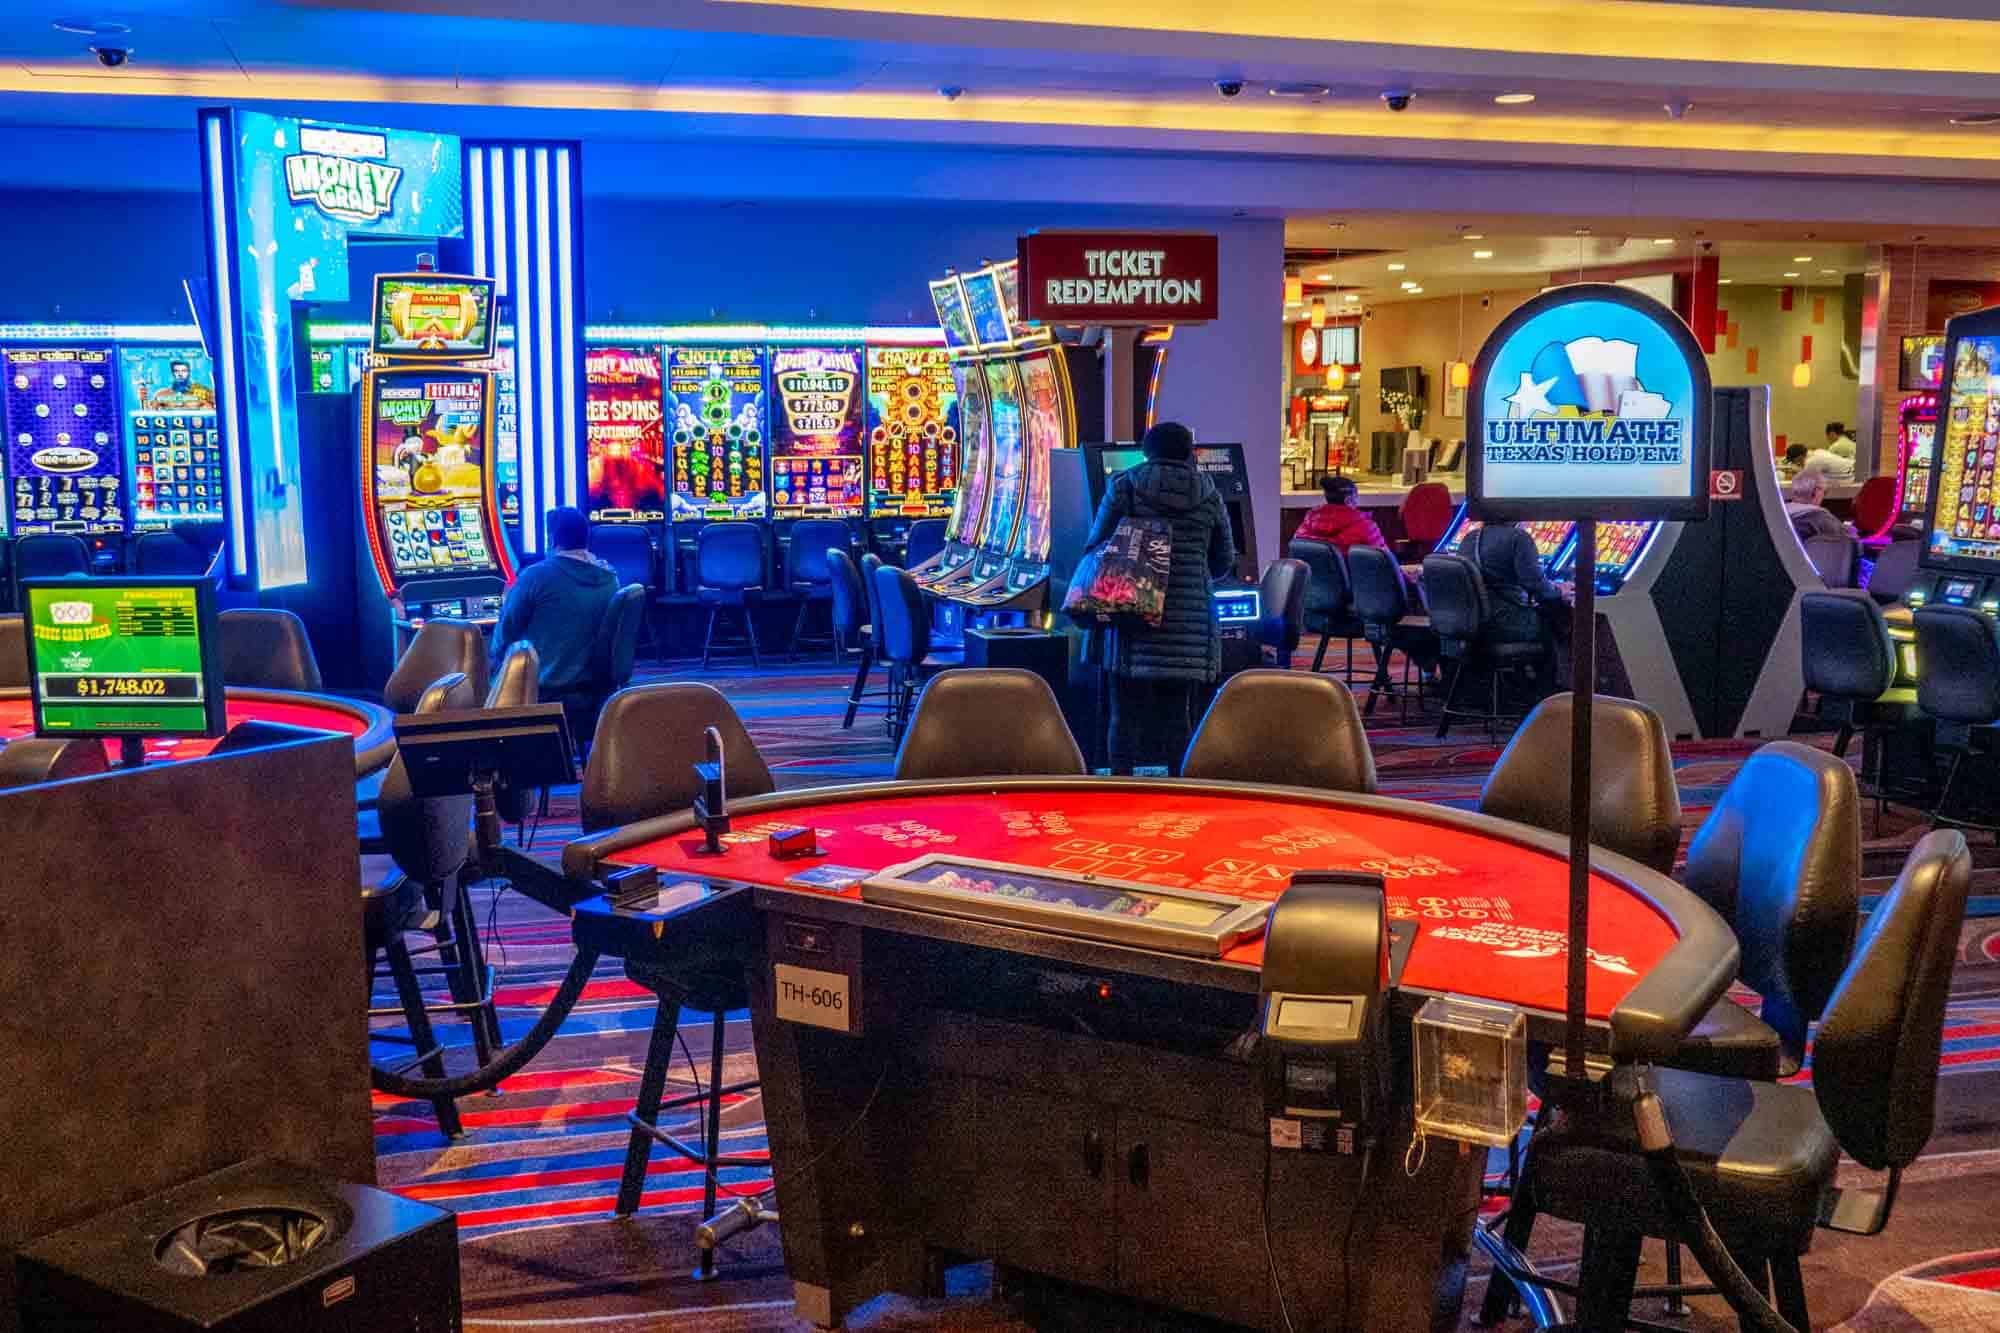 Gaming table and slot machines in a casino